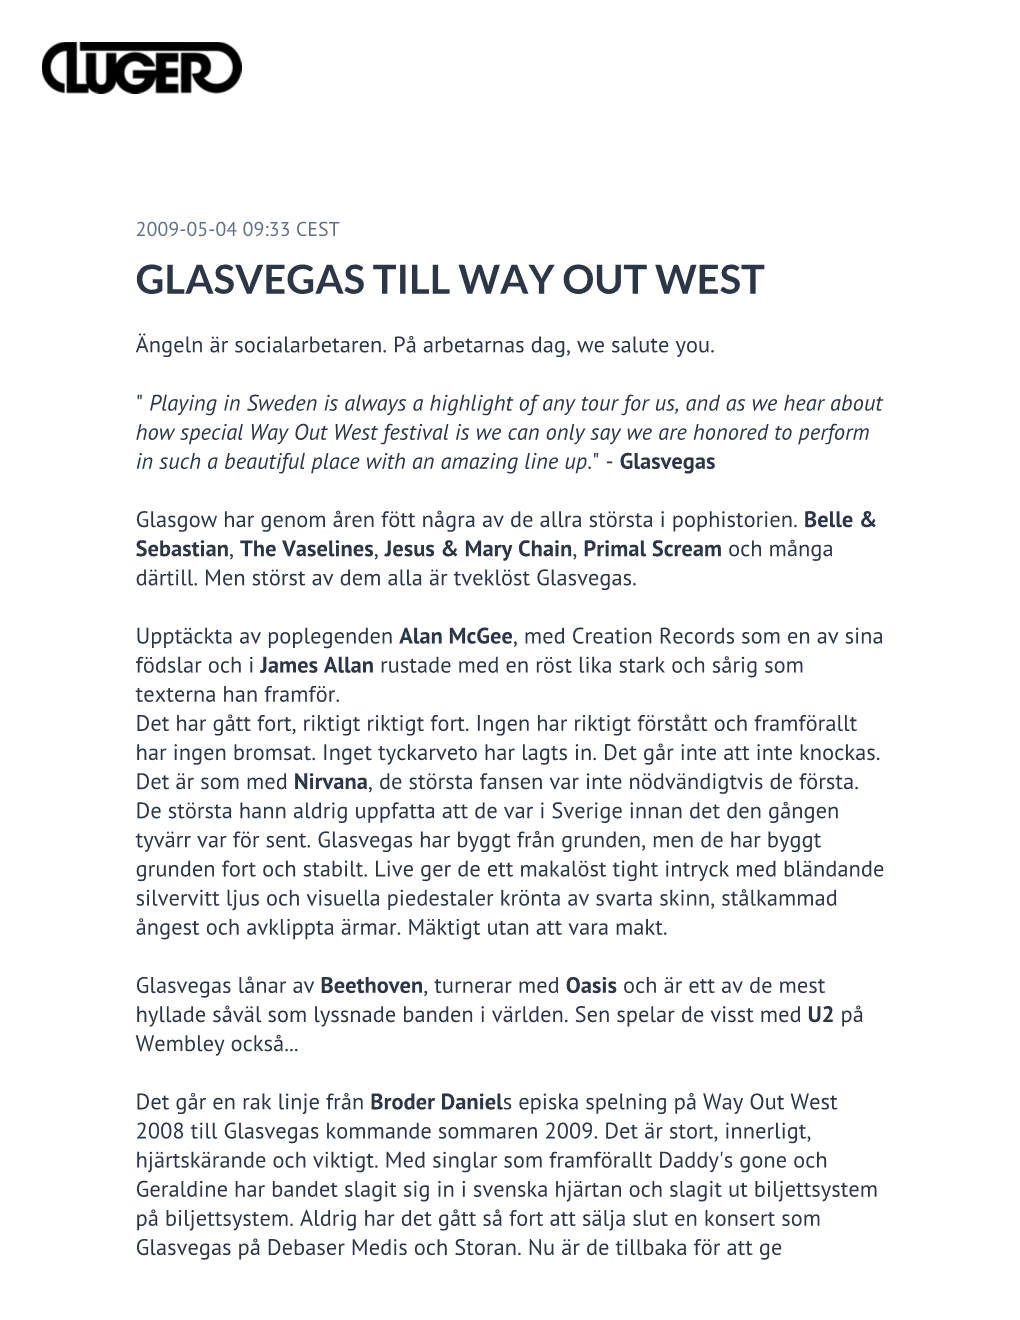 Glasvegas Till Way out West